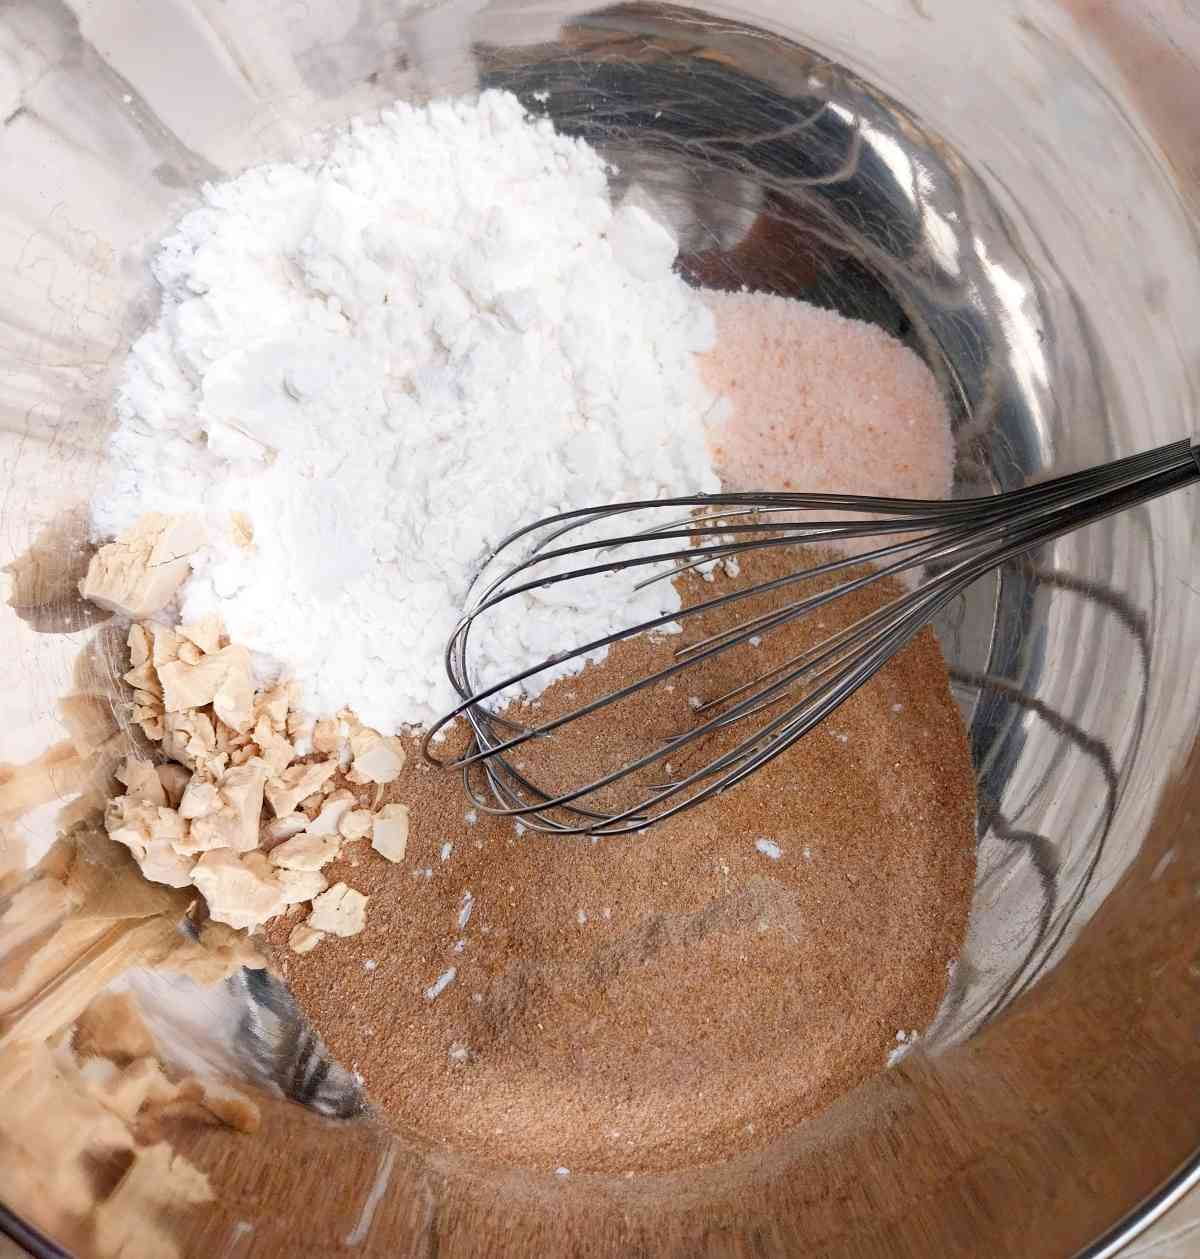 Mixing ingredients with a whisk.